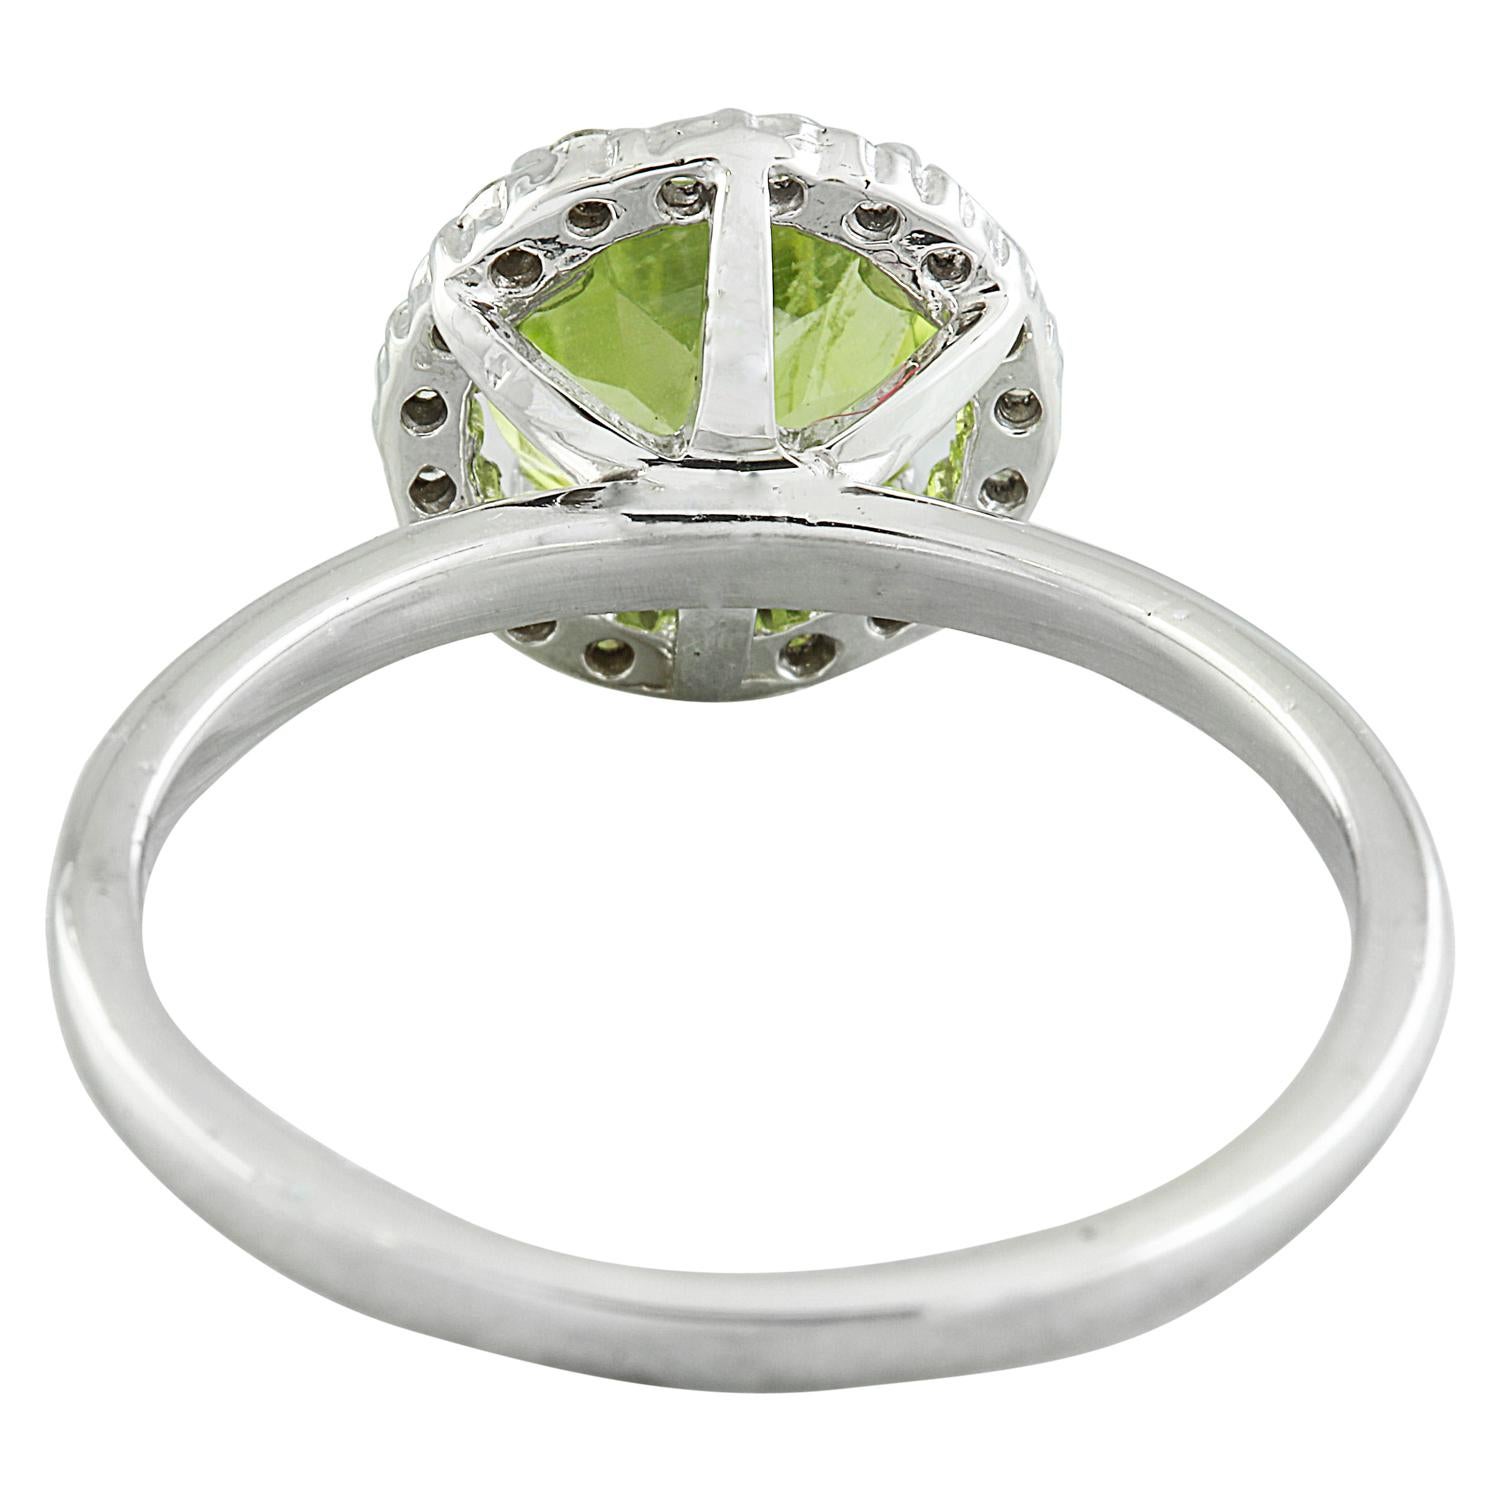 Exquisite Natural Peridot Diamond Ring In 14 Karat White Gold  In New Condition For Sale In Los Angeles, CA